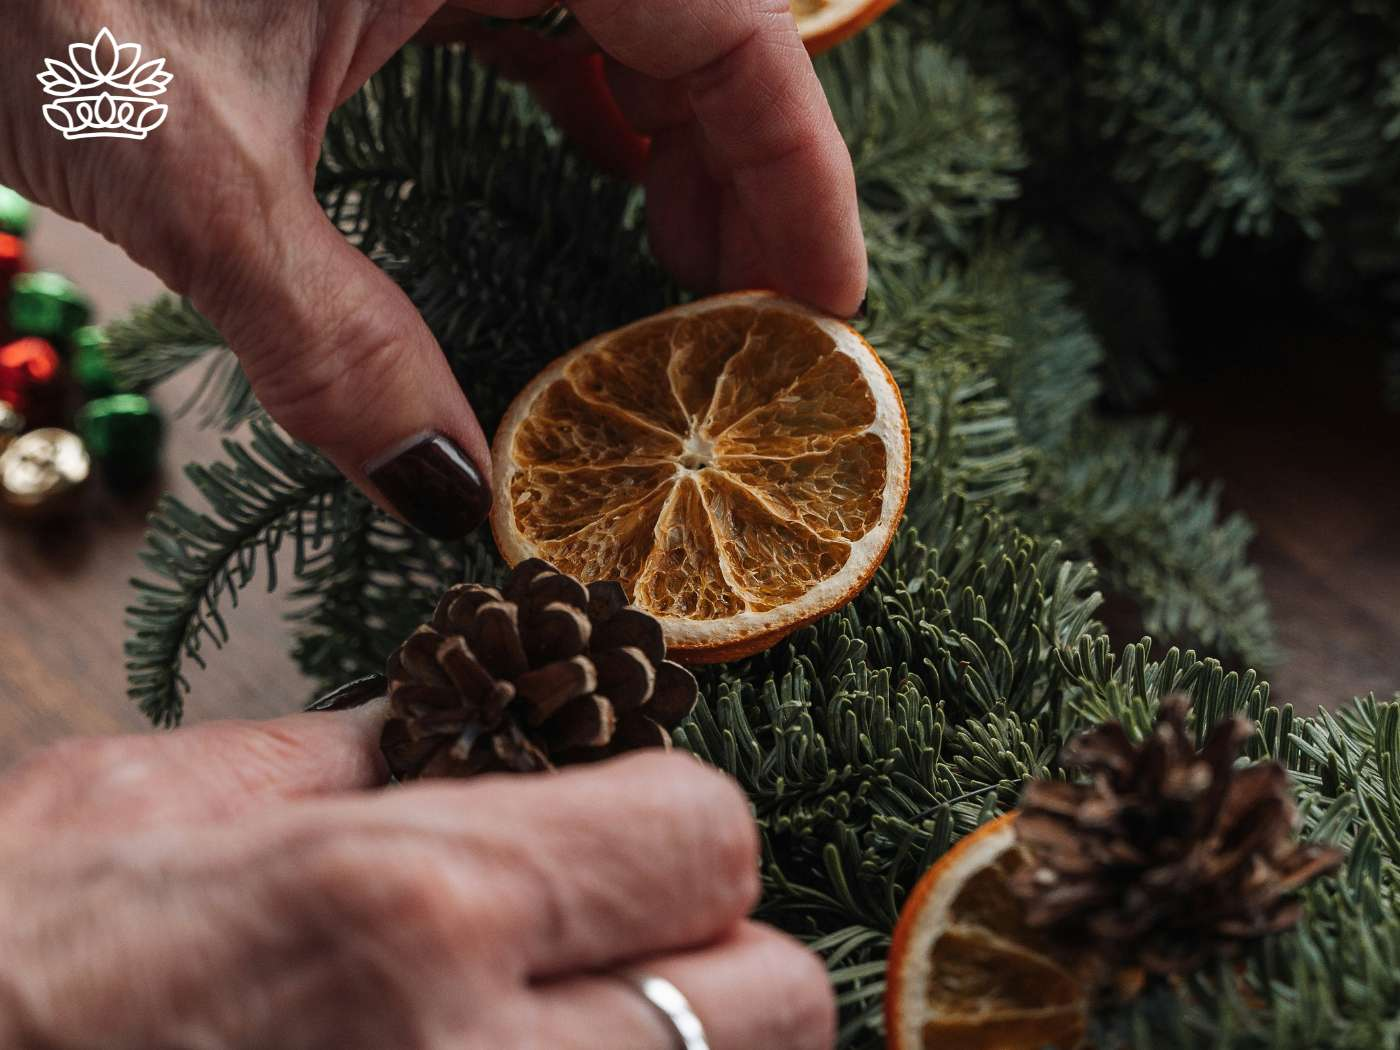 Hands meticulously crafting a Christmas arrangement, using hot glue to affix a dried orange slice to a wreath, amidst pine cones and fresh greenery, a festive bow adding the finishing touch, perfect for ideas to hang and enjoy with kids, from the Christmas Wreaths and Flowers Collection at Fabulous Flowers and Gifts.